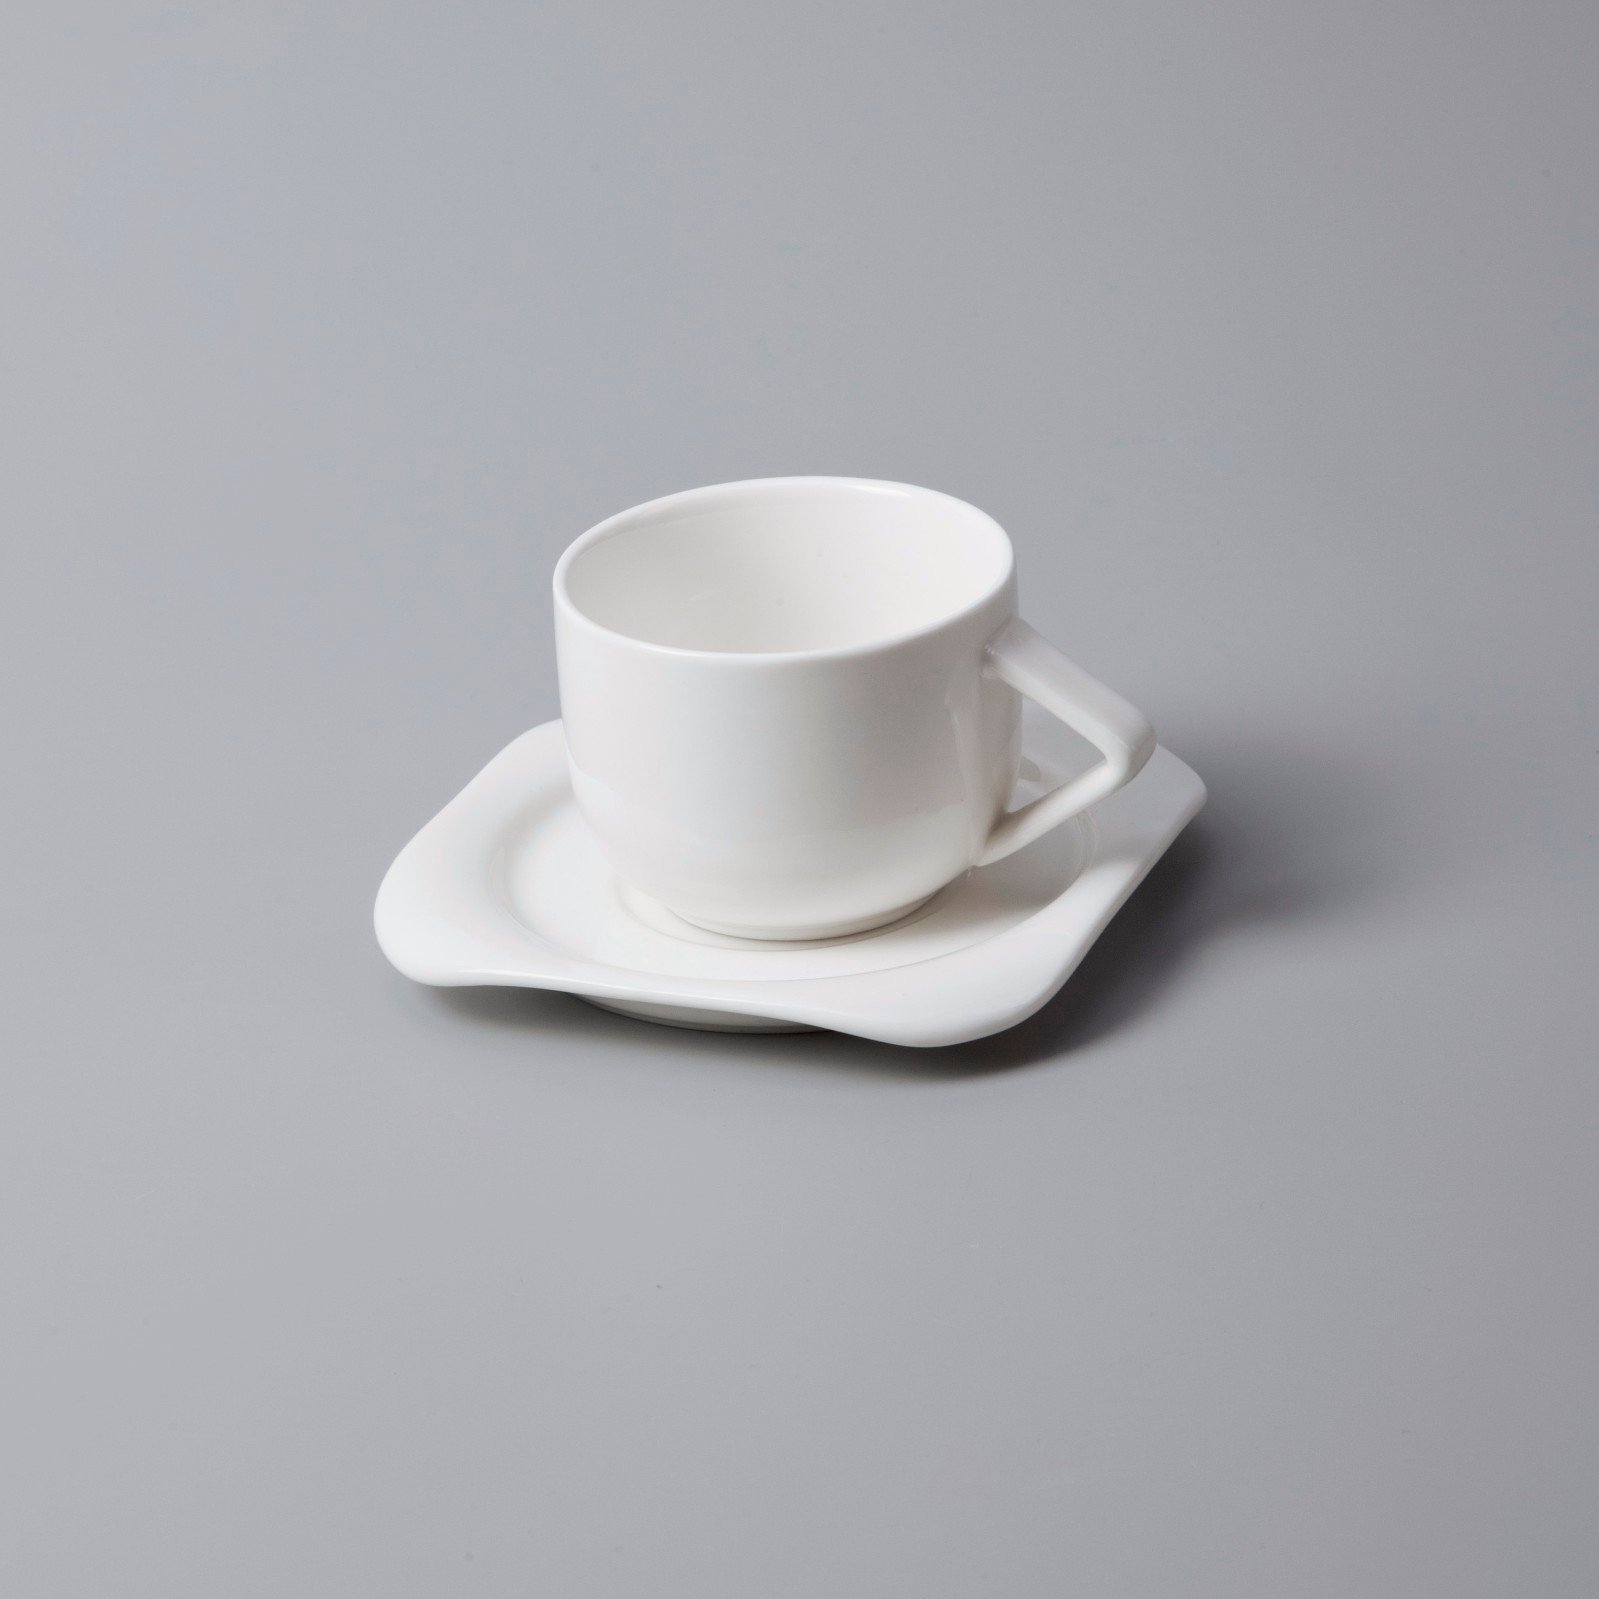 smooth small white porcelain plates from China for home